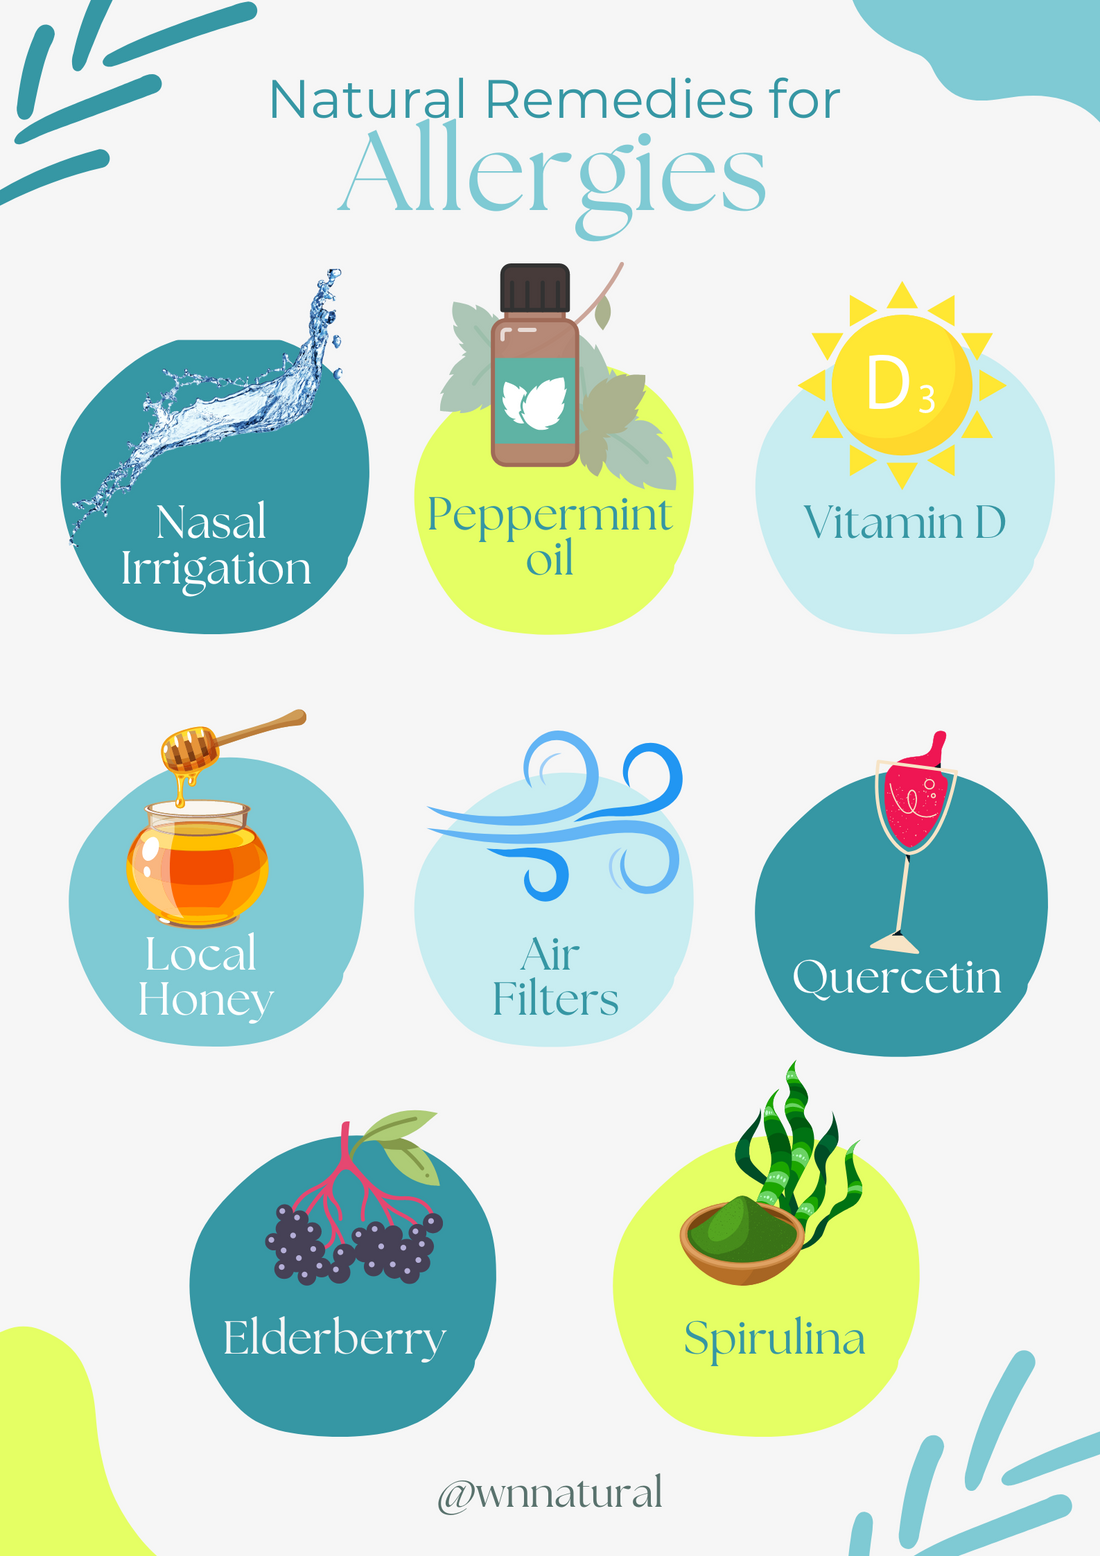 Natural remedies for allergies